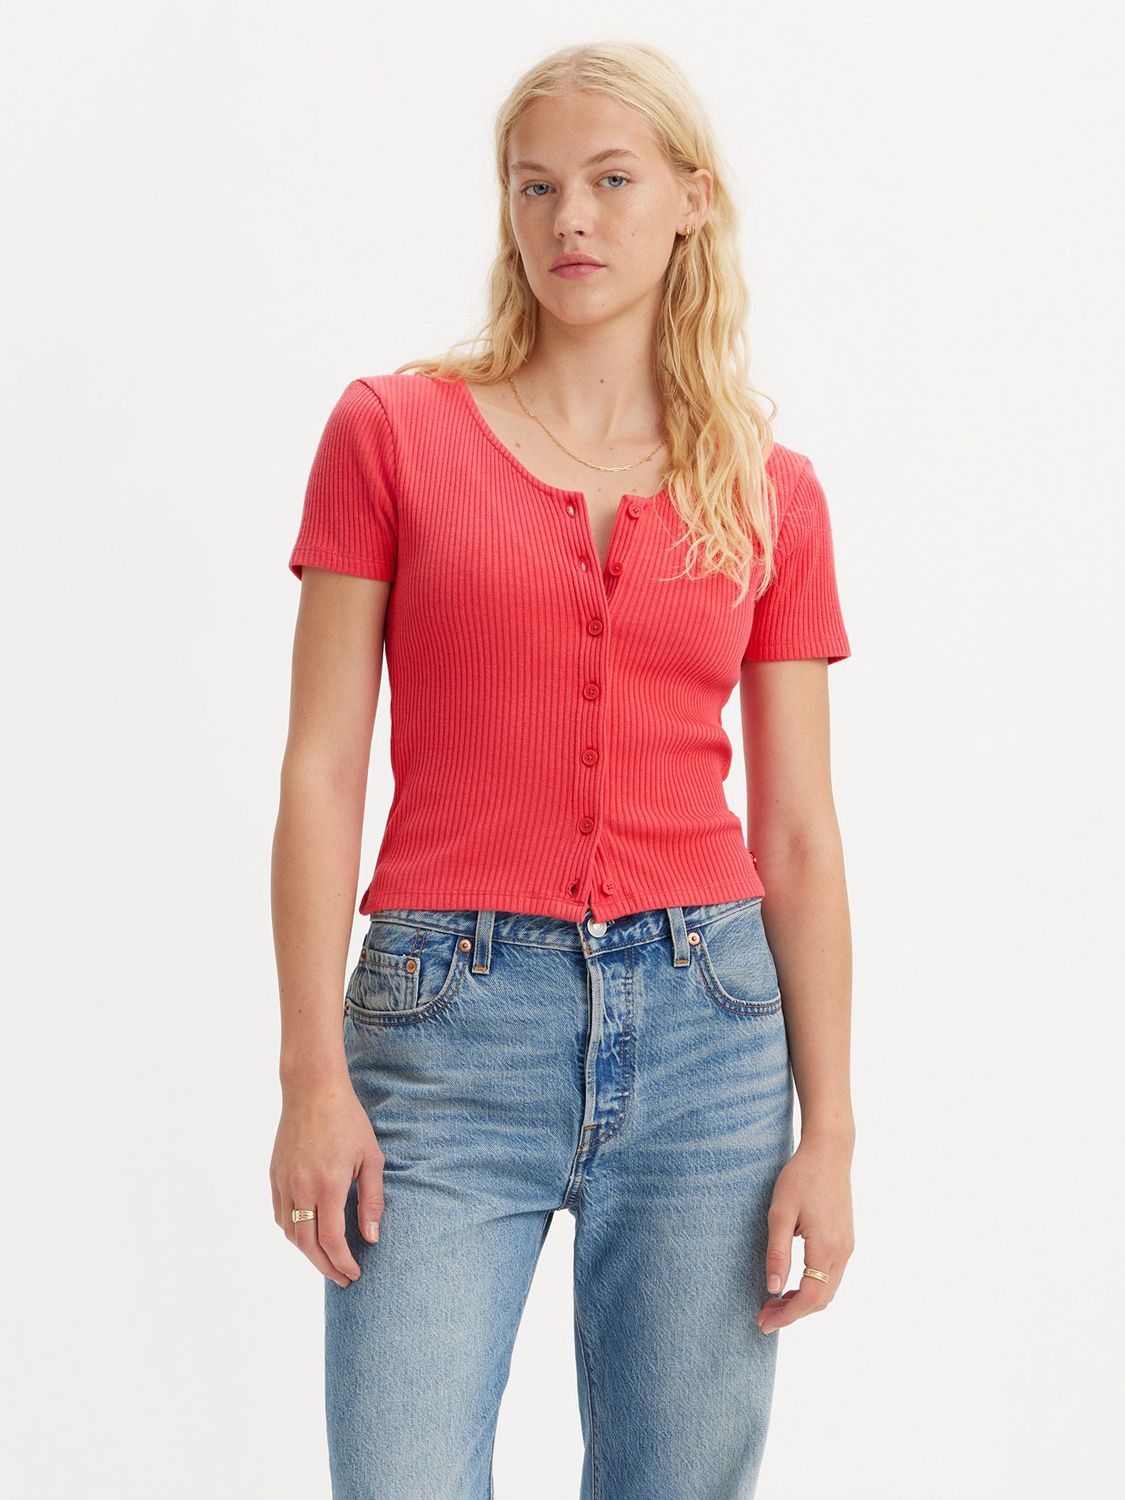 Levi's Monica Button Front Short Sleeve Top, Coral Red, XS